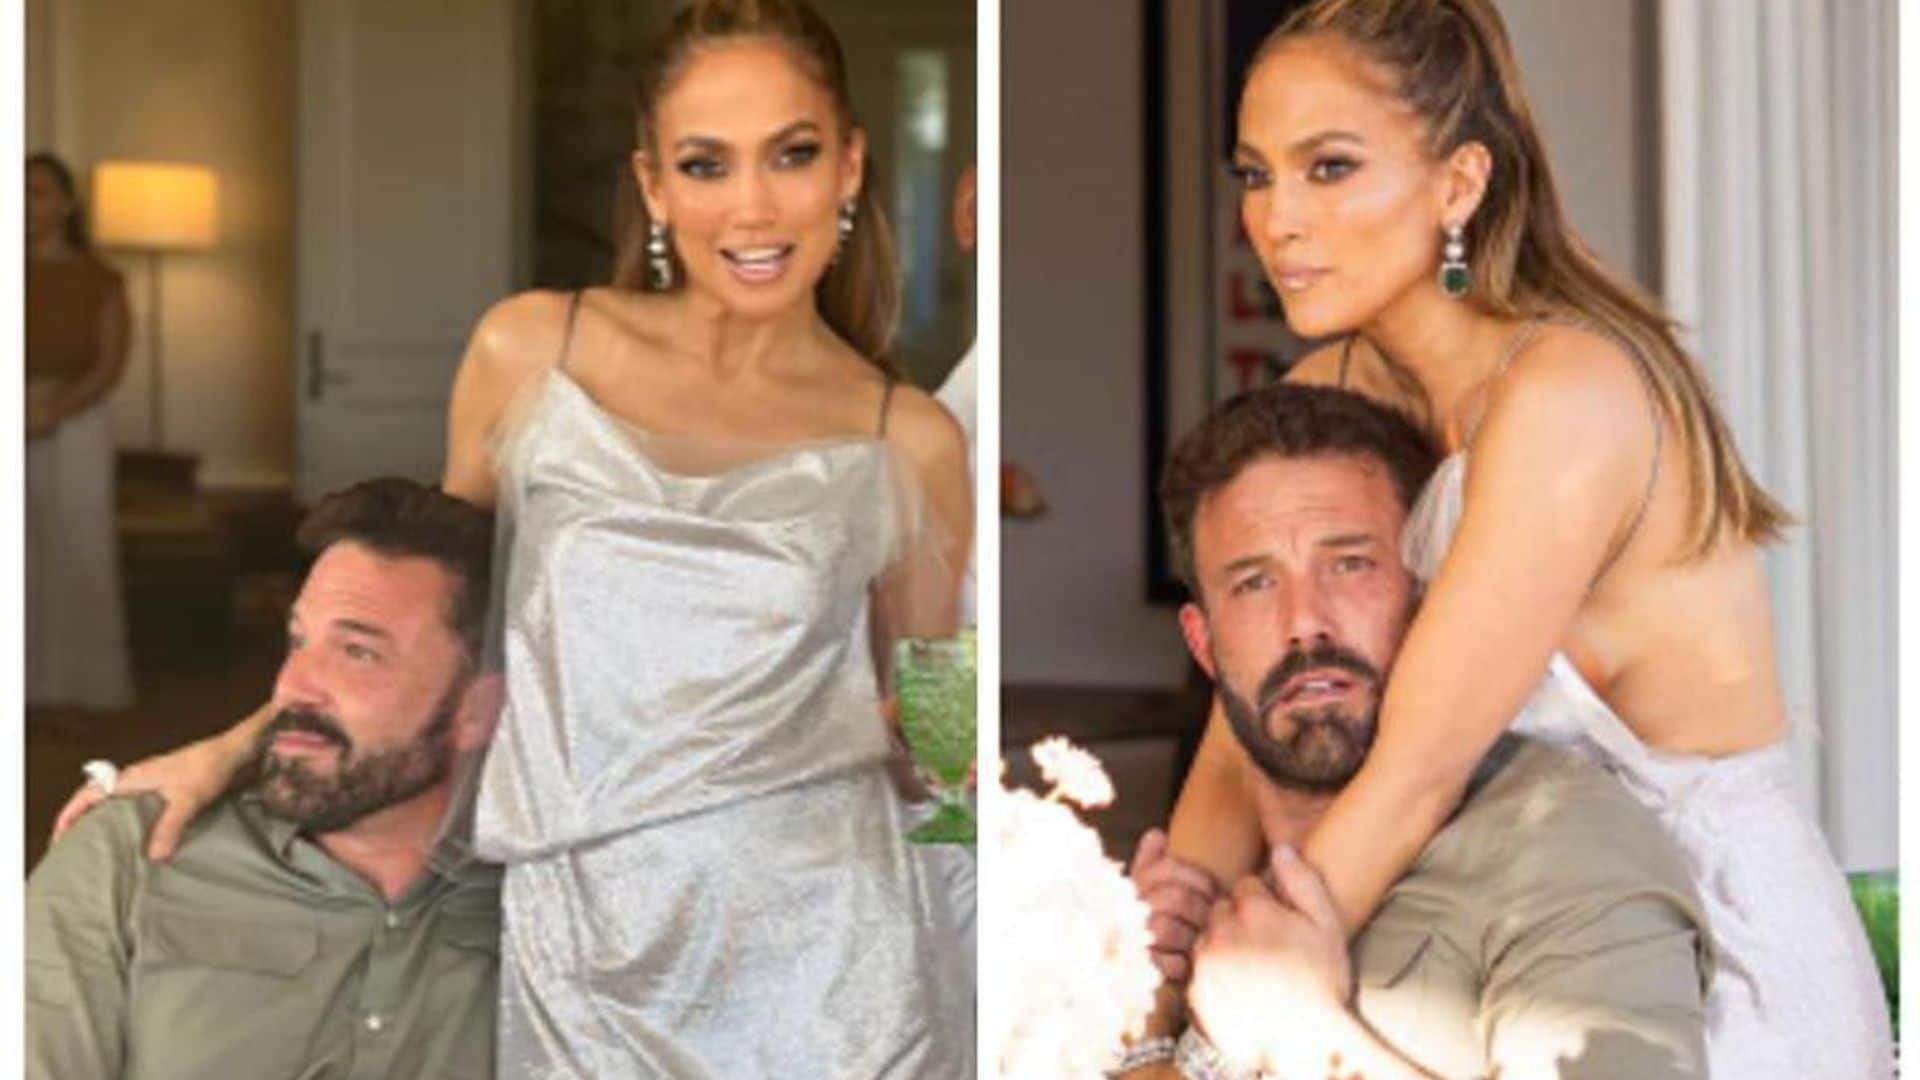 Ben Affleck hosts JLo’s 54th birthday at their new mansion: photos